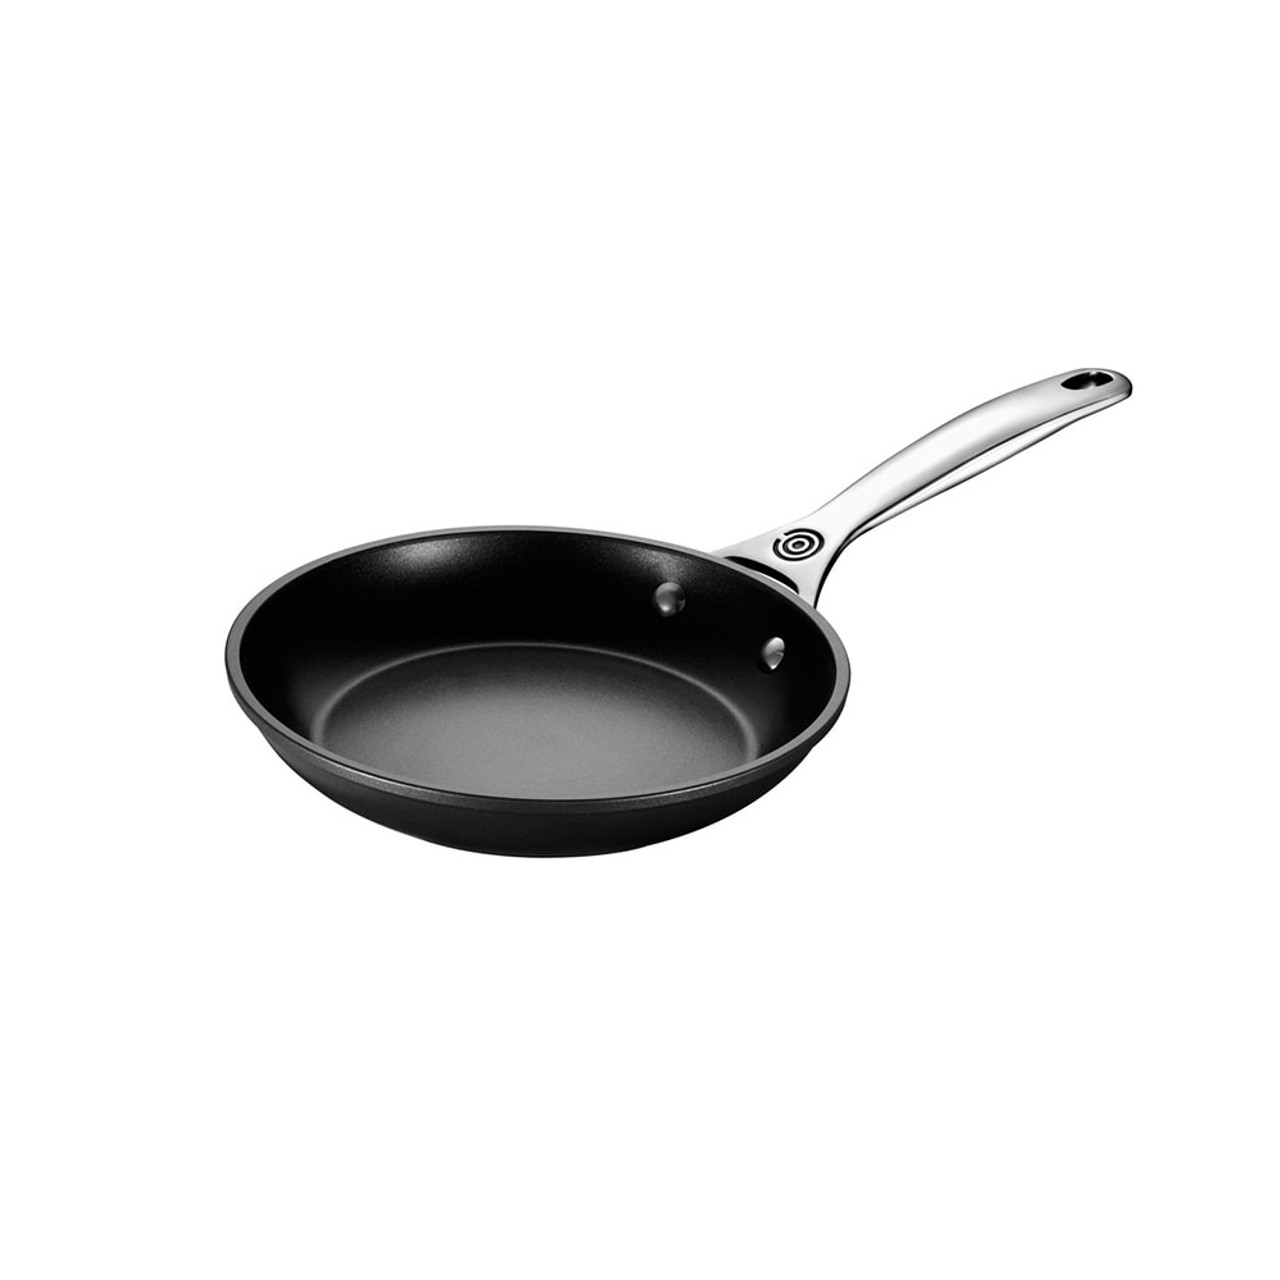 https://cdn11.bigcommerce.com/s-hccytny0od/images/stencil/1280x1280/products/3302/11825/le-creuset-tns-pro-fry-pan-8in__88996.1592345856.jpg?c=2?imbypass=on